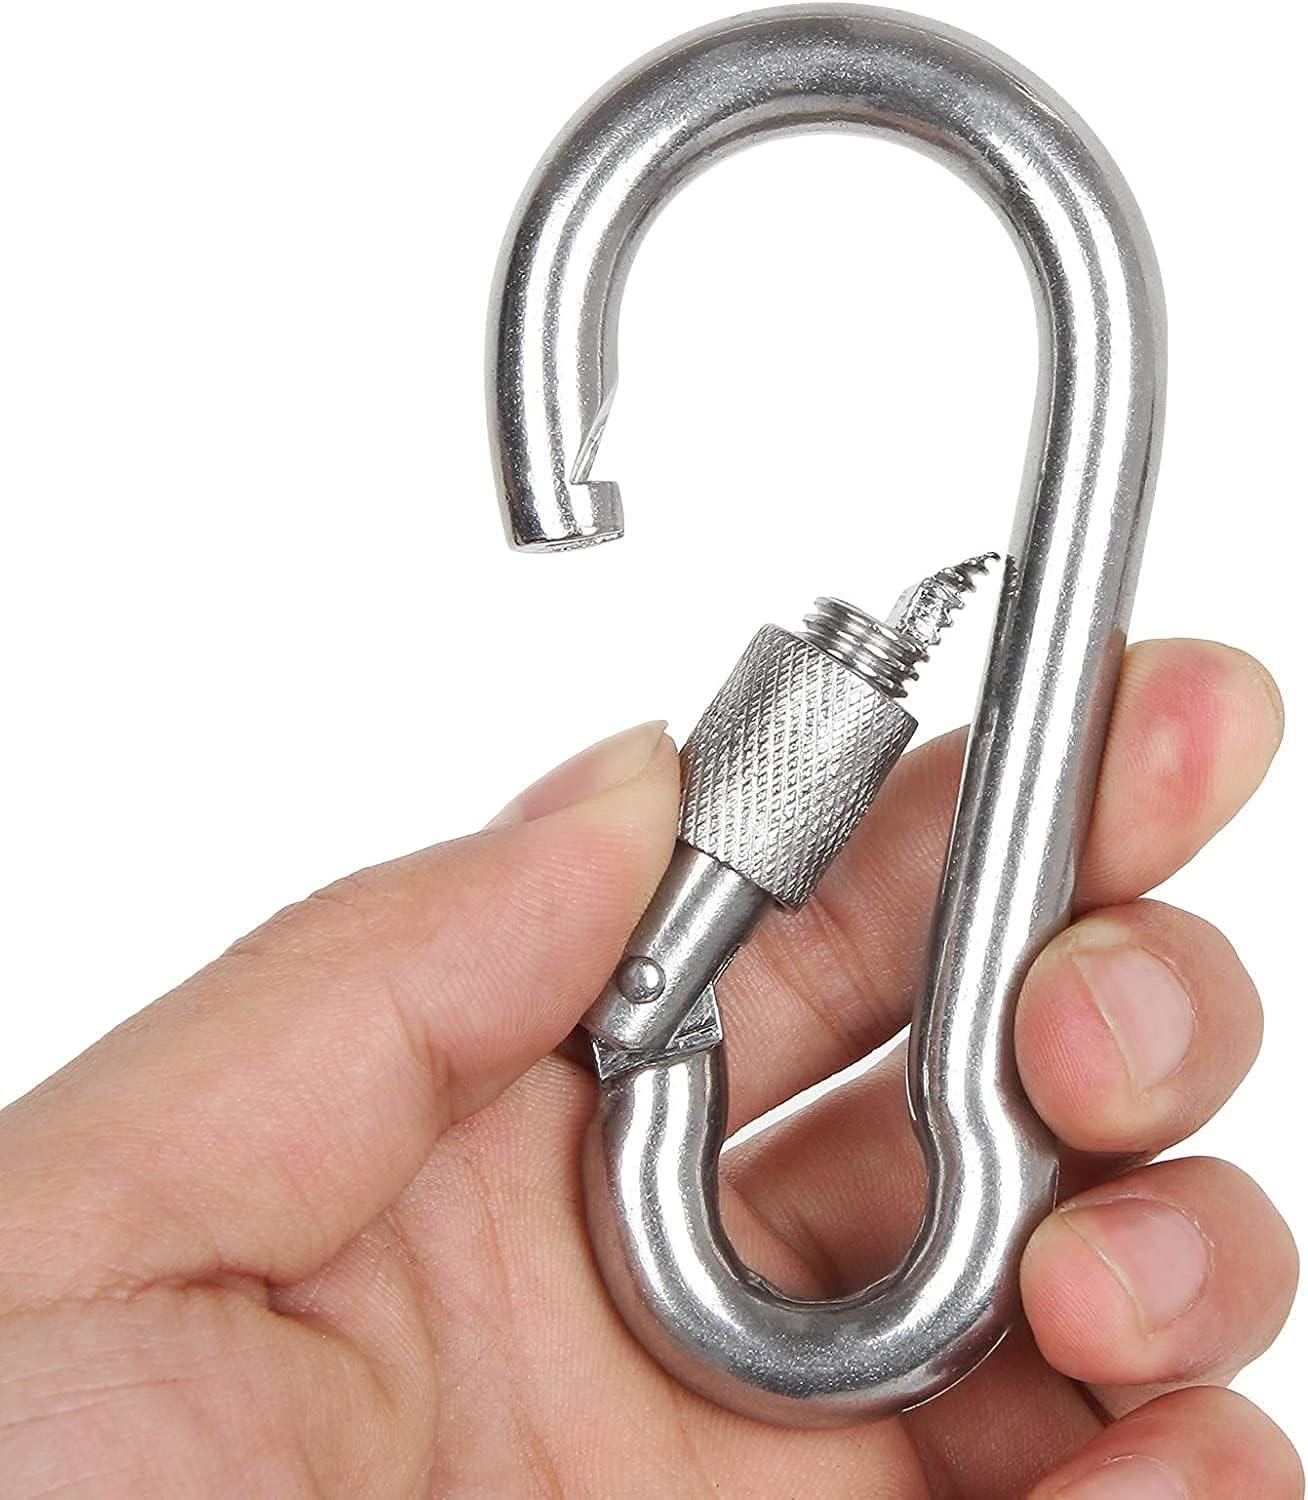 Acquwistach 6 Pack Locking Carabiners Clips 3.15 Stainless Steel